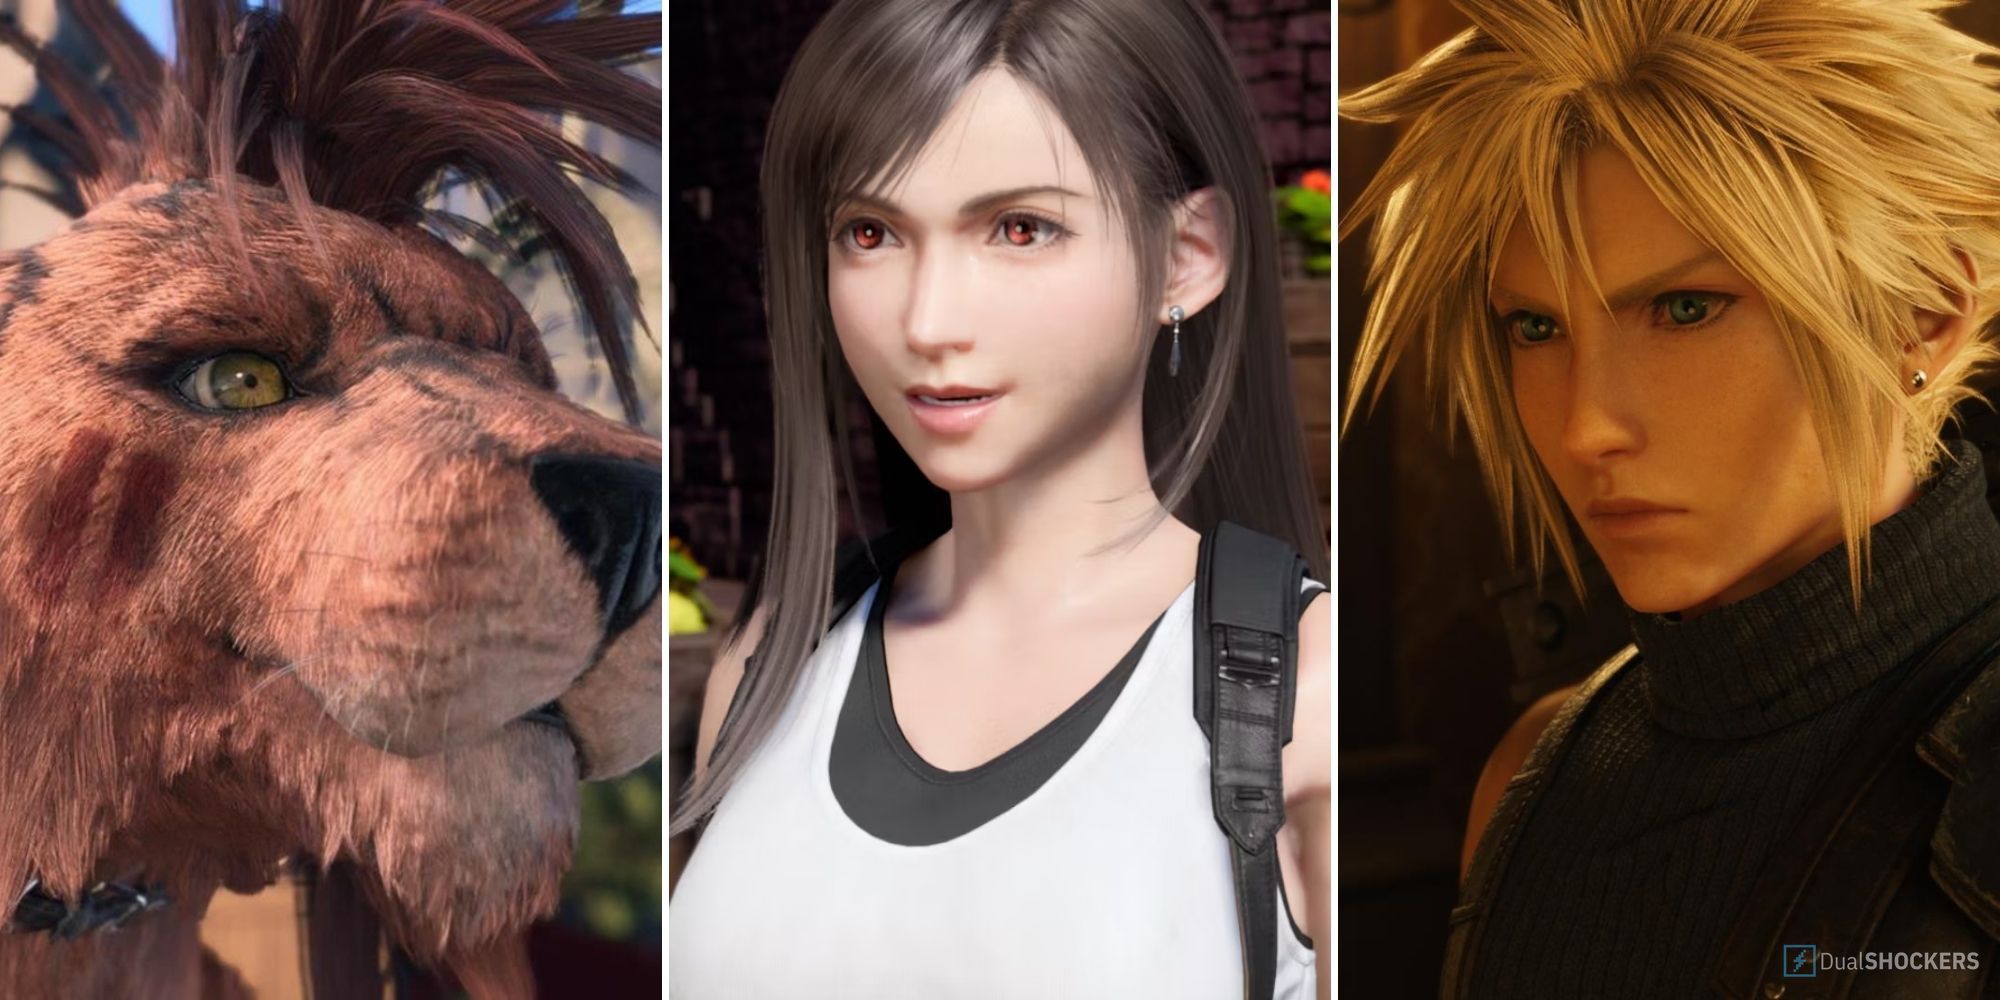 Split image of a close up of Red XIII's face, Tifa in a white top, and Cloud looking concerned from Final Fantasy 7 Rebirth